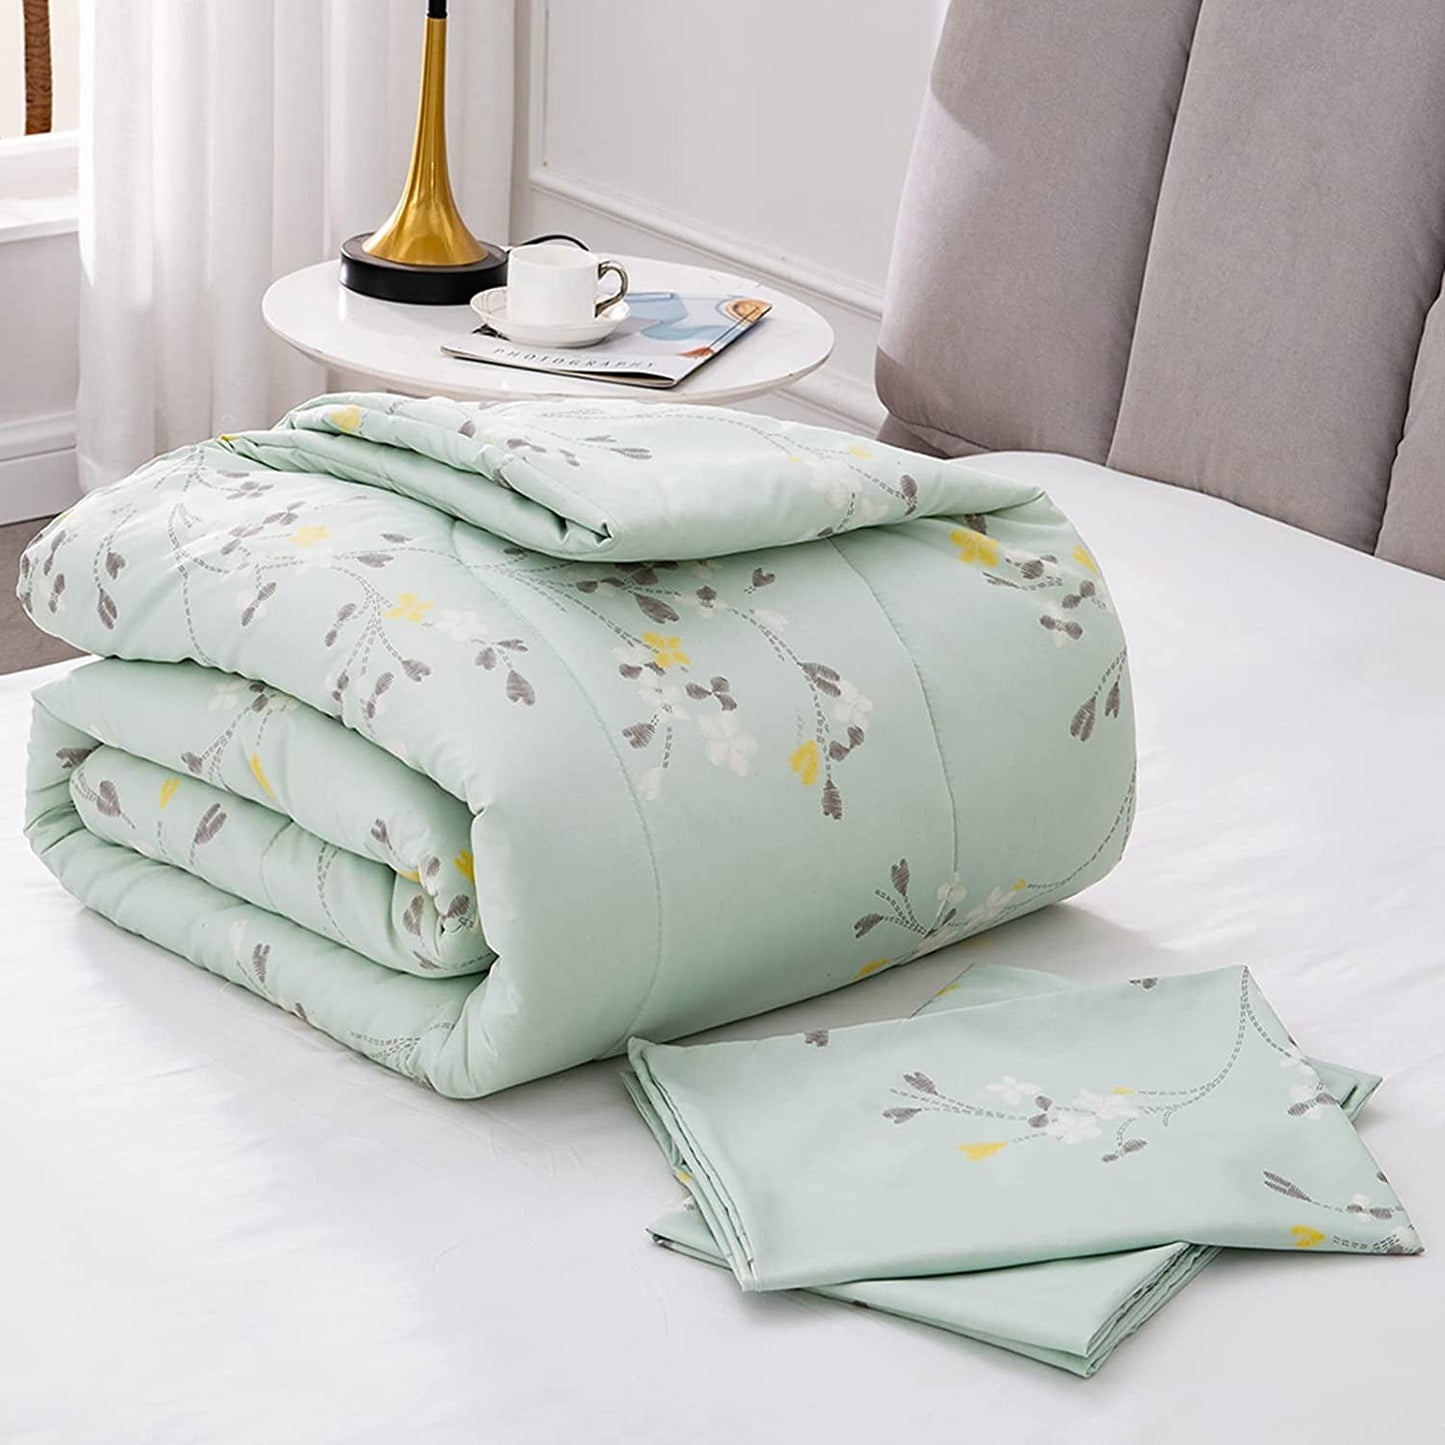 Exclusivo Mezcla 2-Piece Floral Twin Comforter Set, Microfiber Bedding Down Alternative Comforter for All Seasons with 1 Pillow Sham, Milky Green